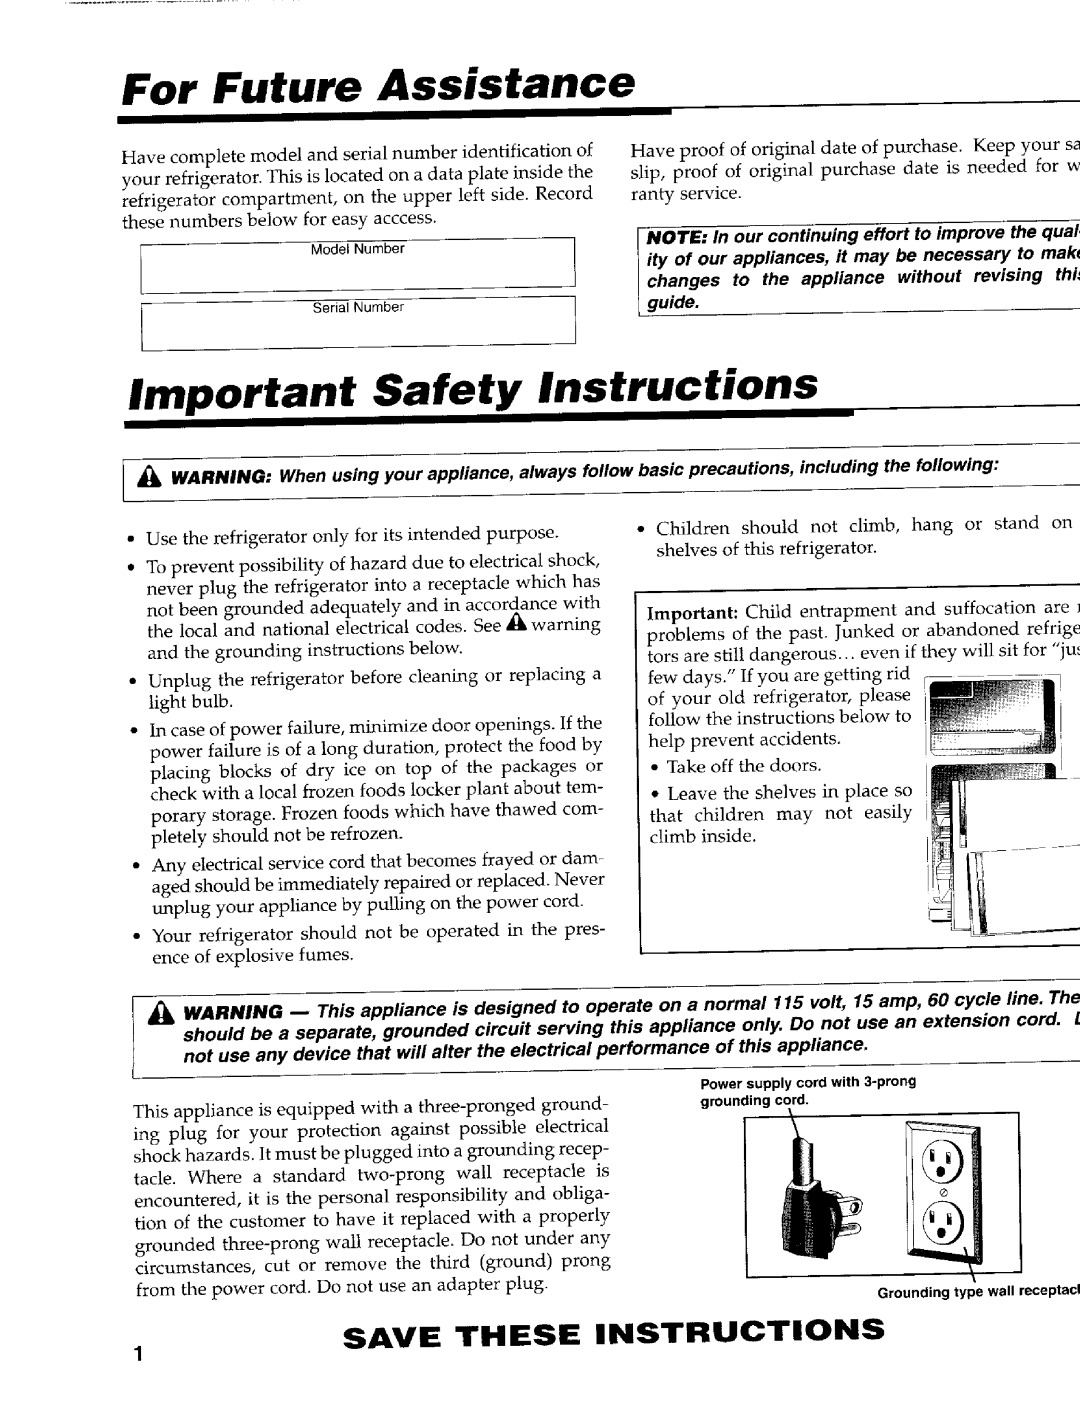 Maytag 61005031 For Future Assistance, Save These Instructions, Important Safety Instructions, ModeNulmber, groundingcord 